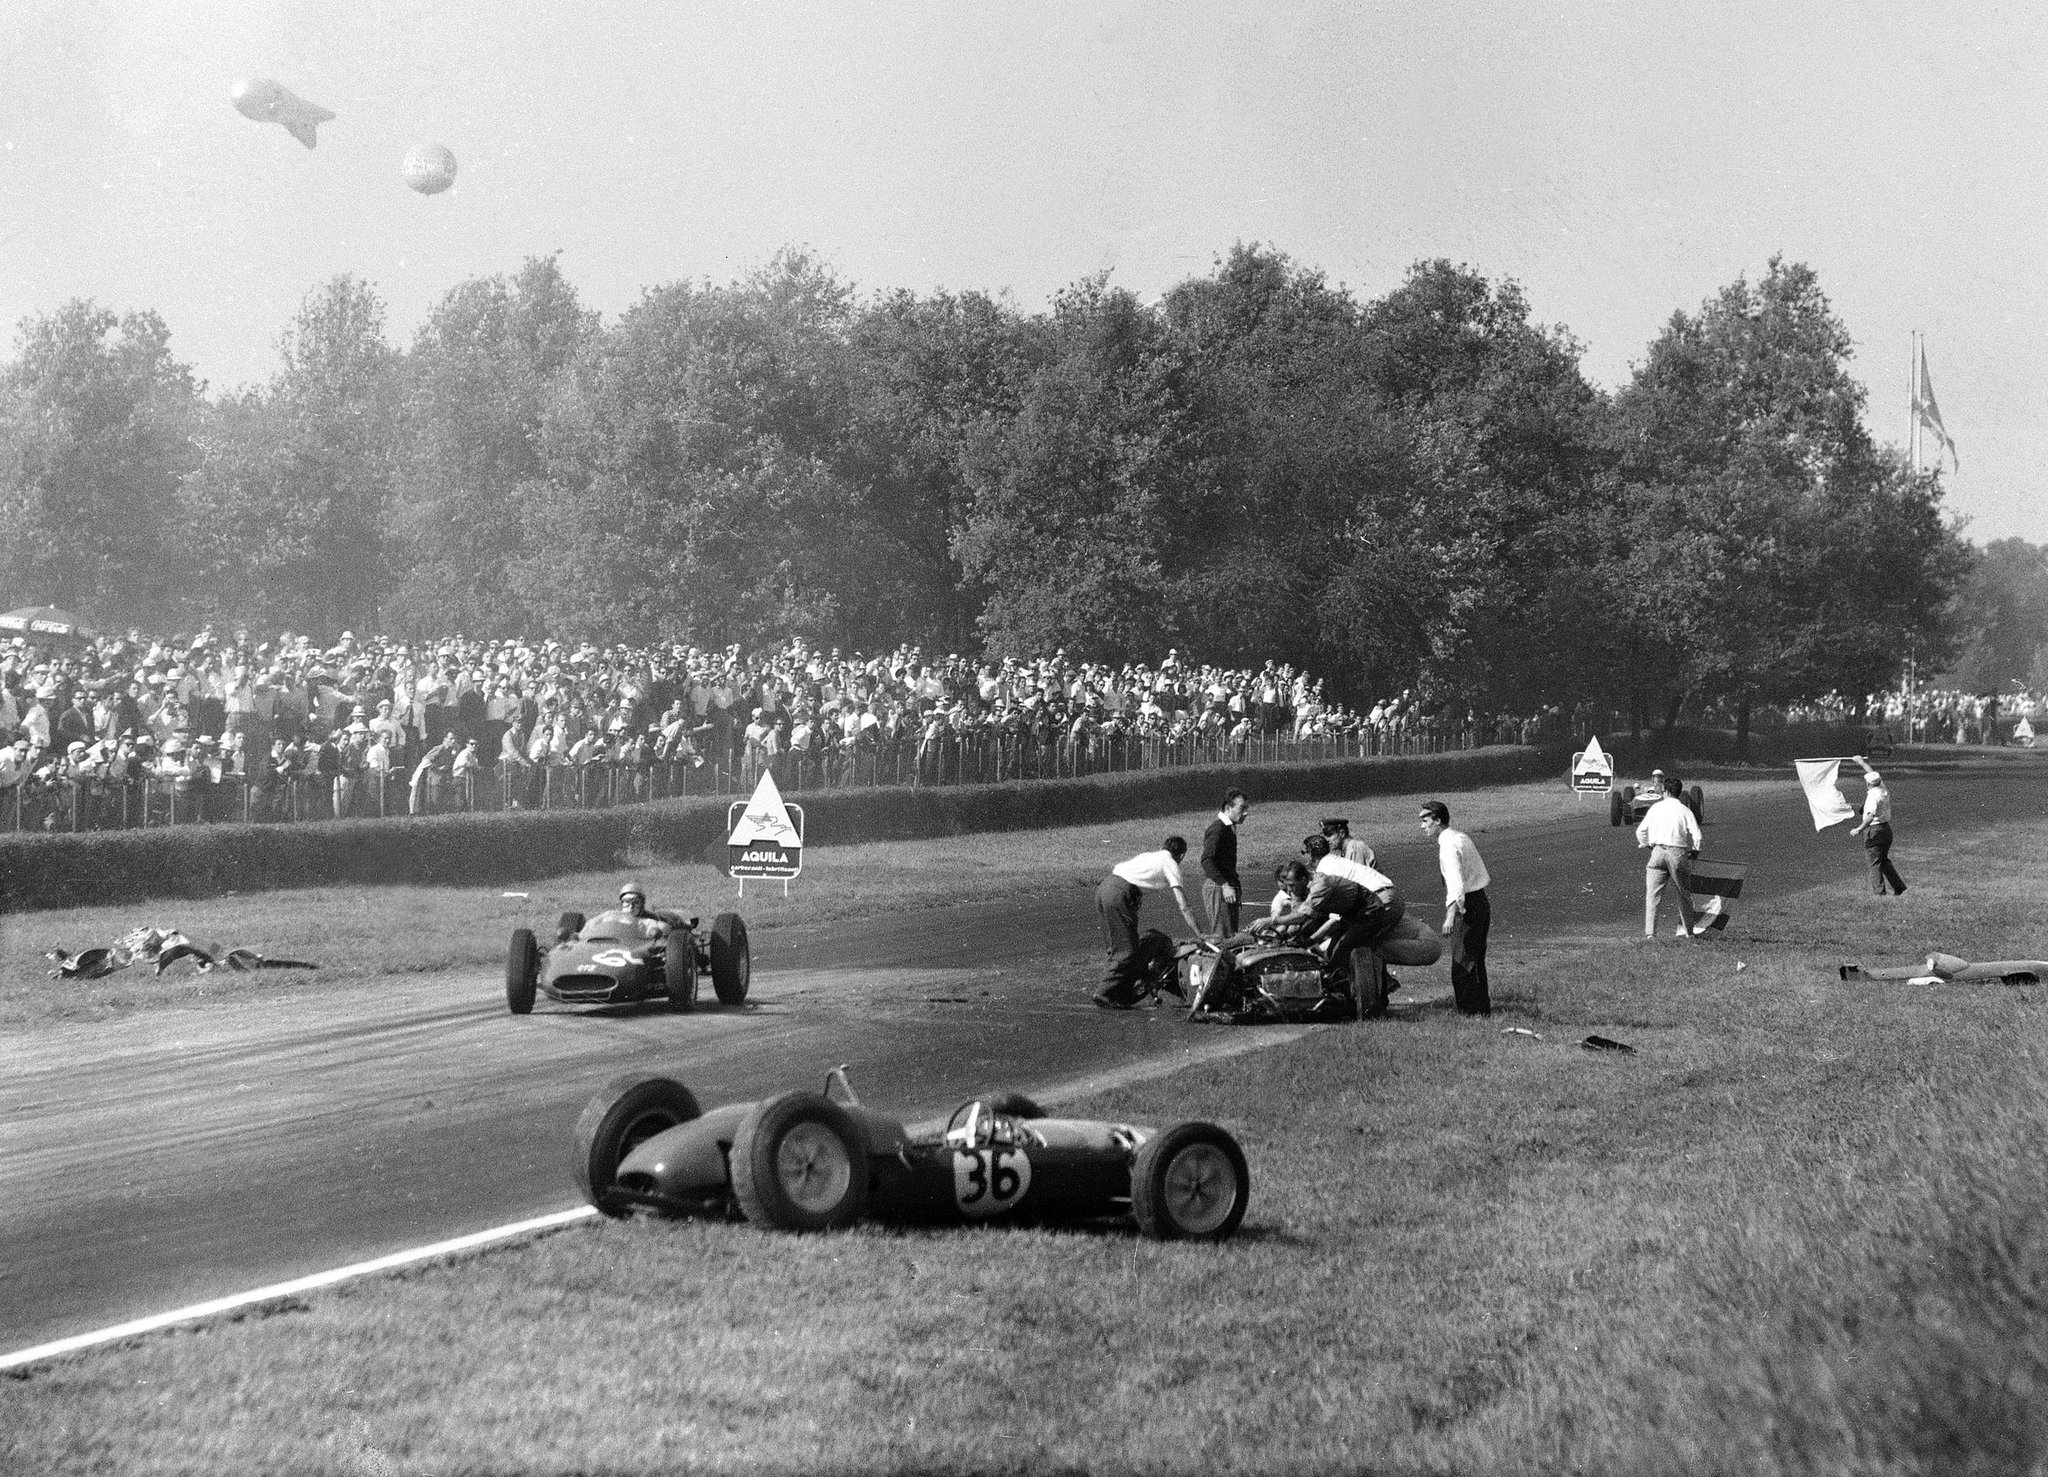 The Ferrari driver Wolfgang von Trips died in a crash that also killed 14 spectators at the Italian Grand Prix in 1961. 